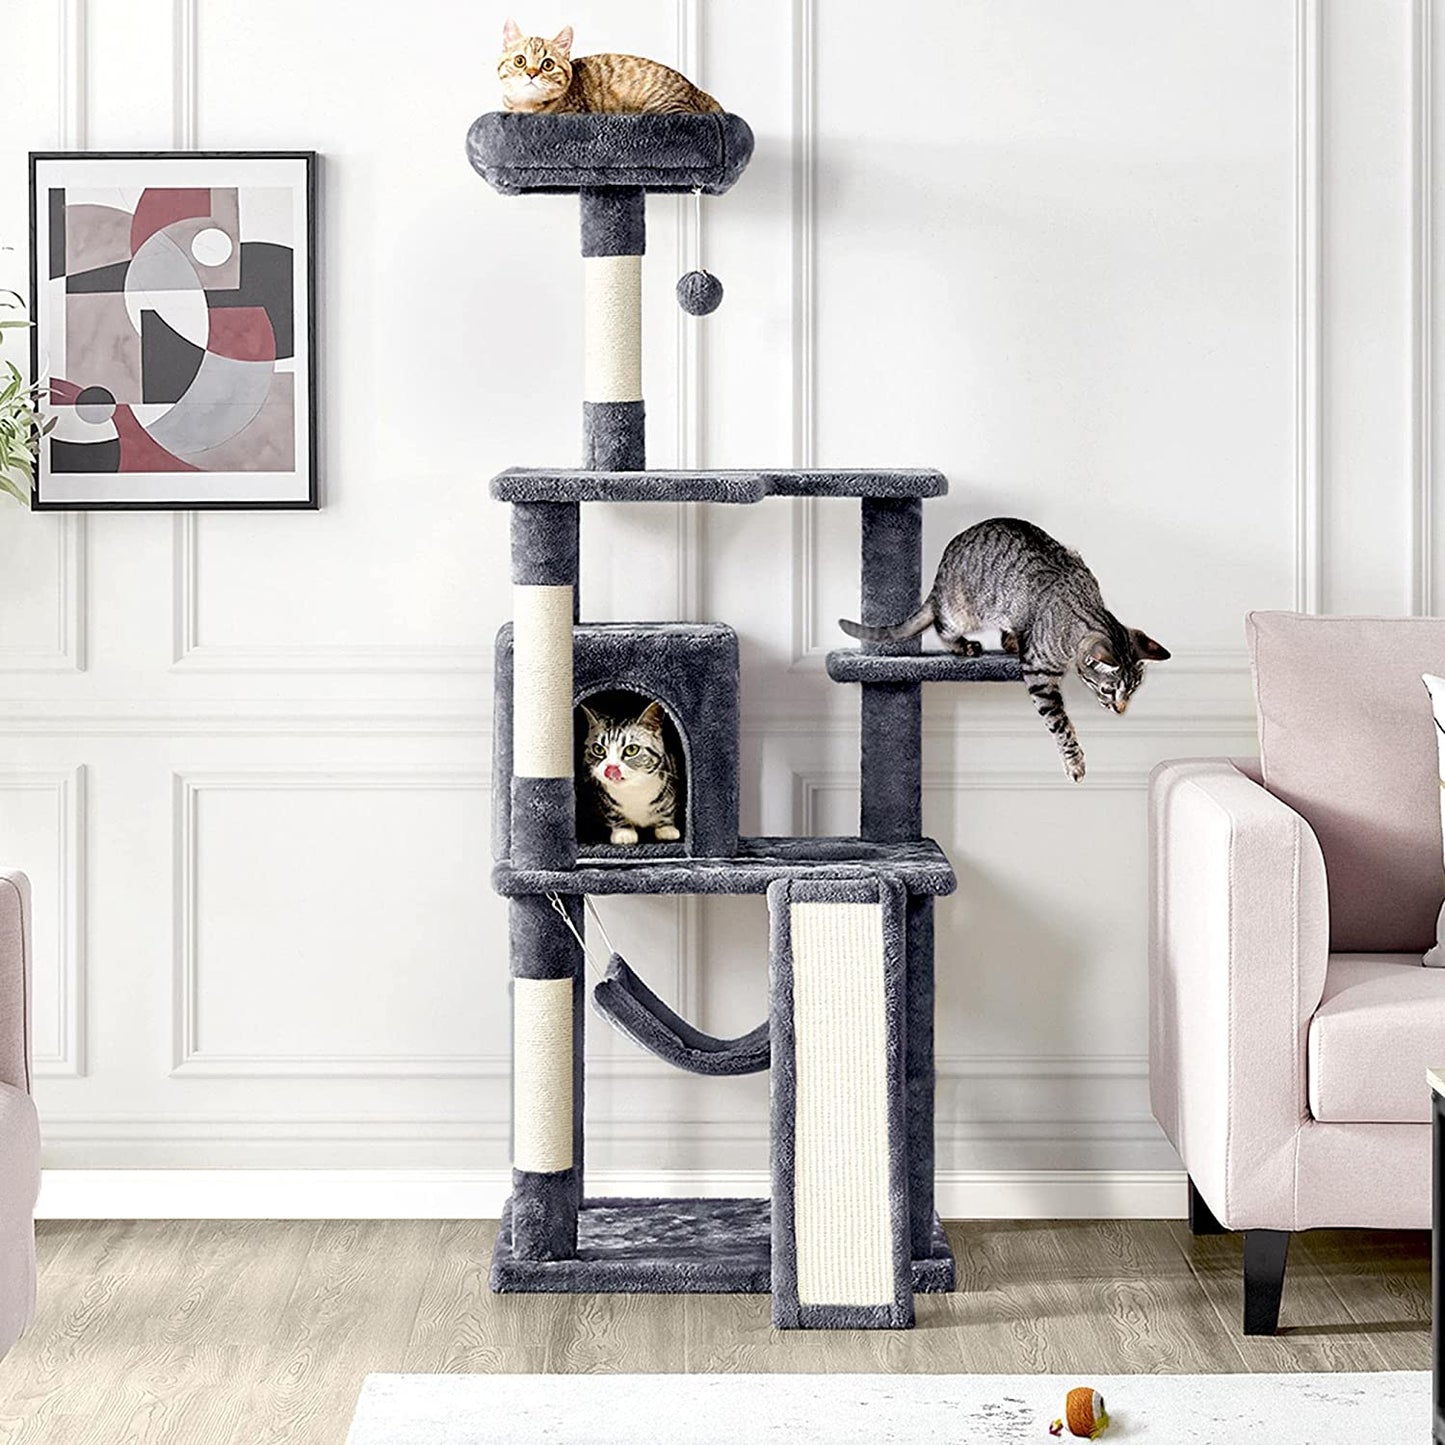 60.5In Multi-Level Cat Tree Tower for Indoor Cats Cat House with Scratching Board Posts, Condo, Hammock, Soft Perch Cat Activity Center Furniture for Large Cats